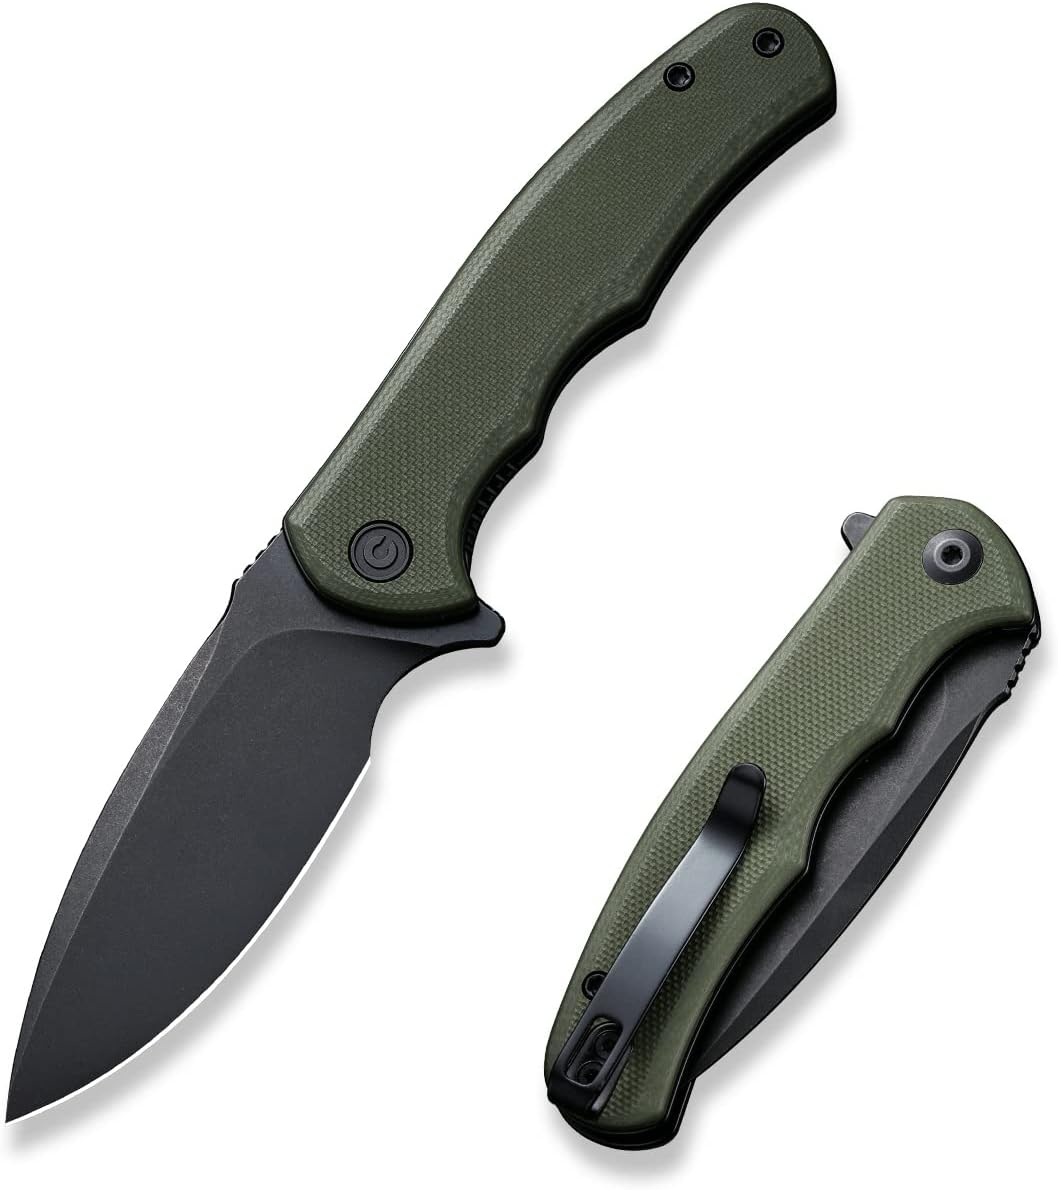 d2 steel blade g10 handle small edc knife with pocket clip